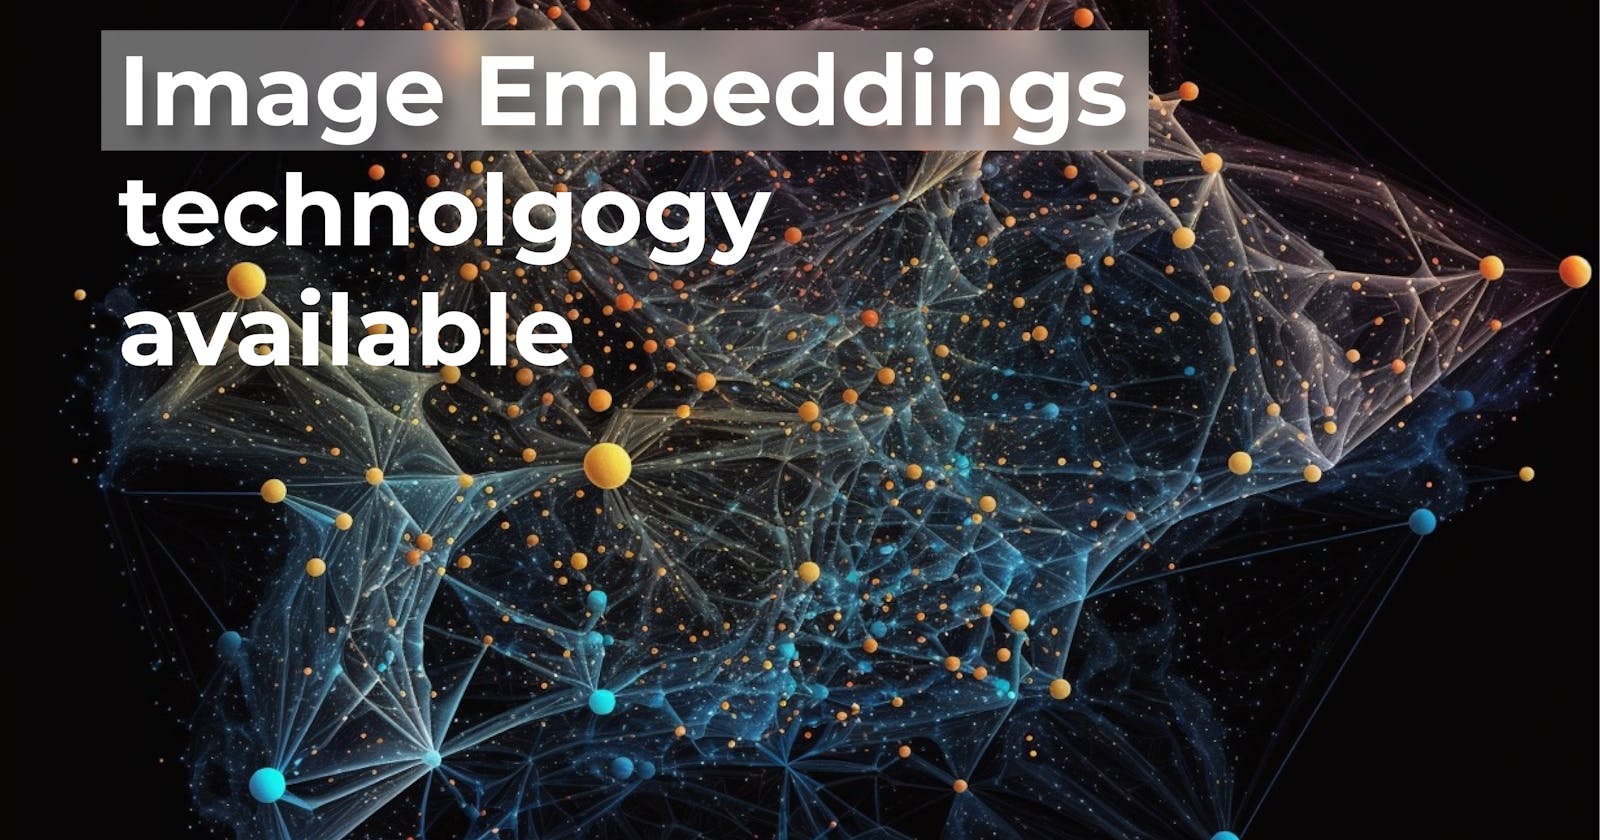 NEW: Image Embeddings available on Eden AI